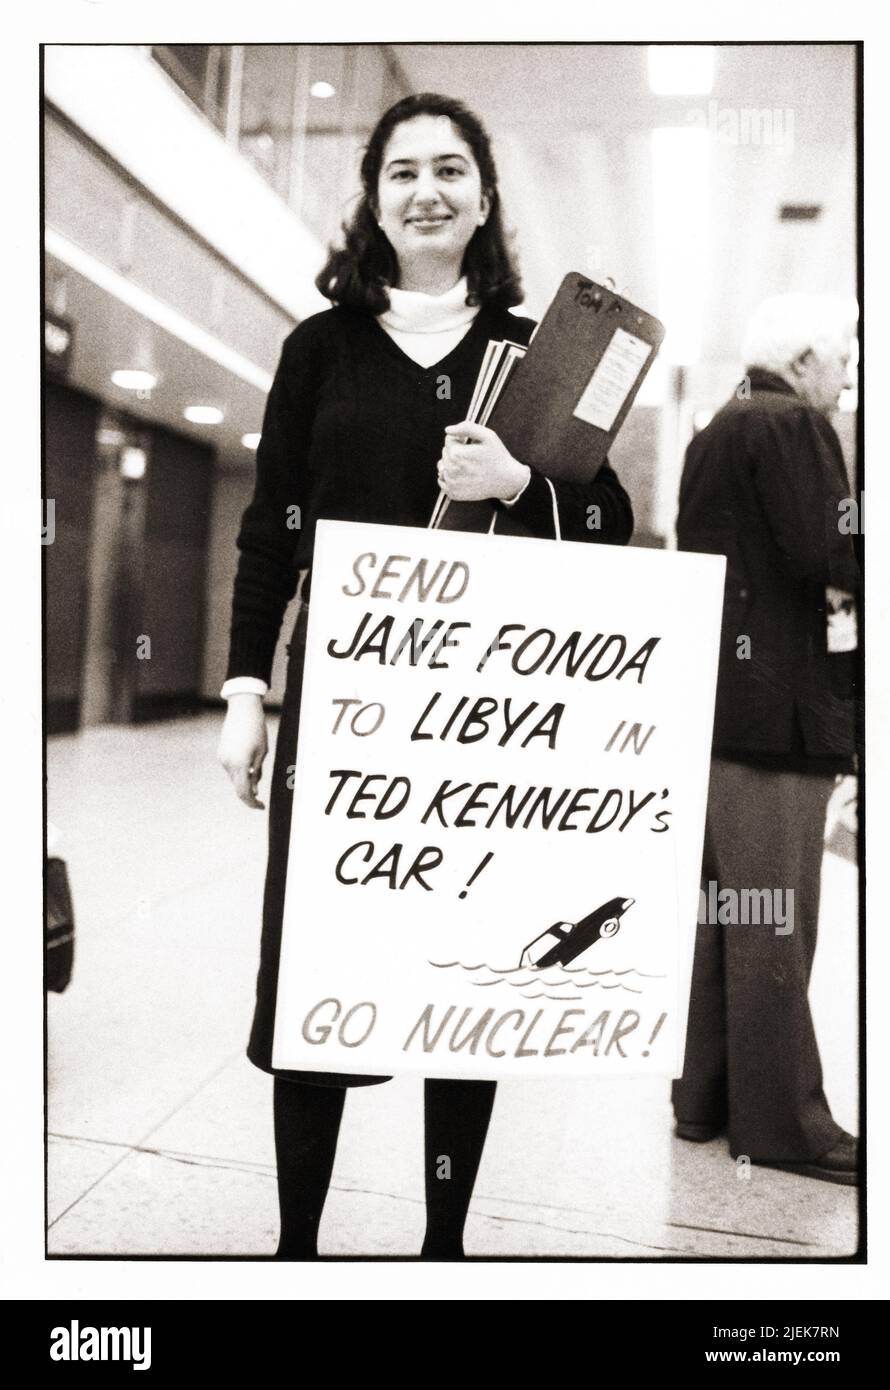 A woman pro-nuclear protester at LaGuardia Airport in Queens with a sign trashing Jane Fonda and Teddy Kennedy. In Queens, New York circa 1978. Stock Photo